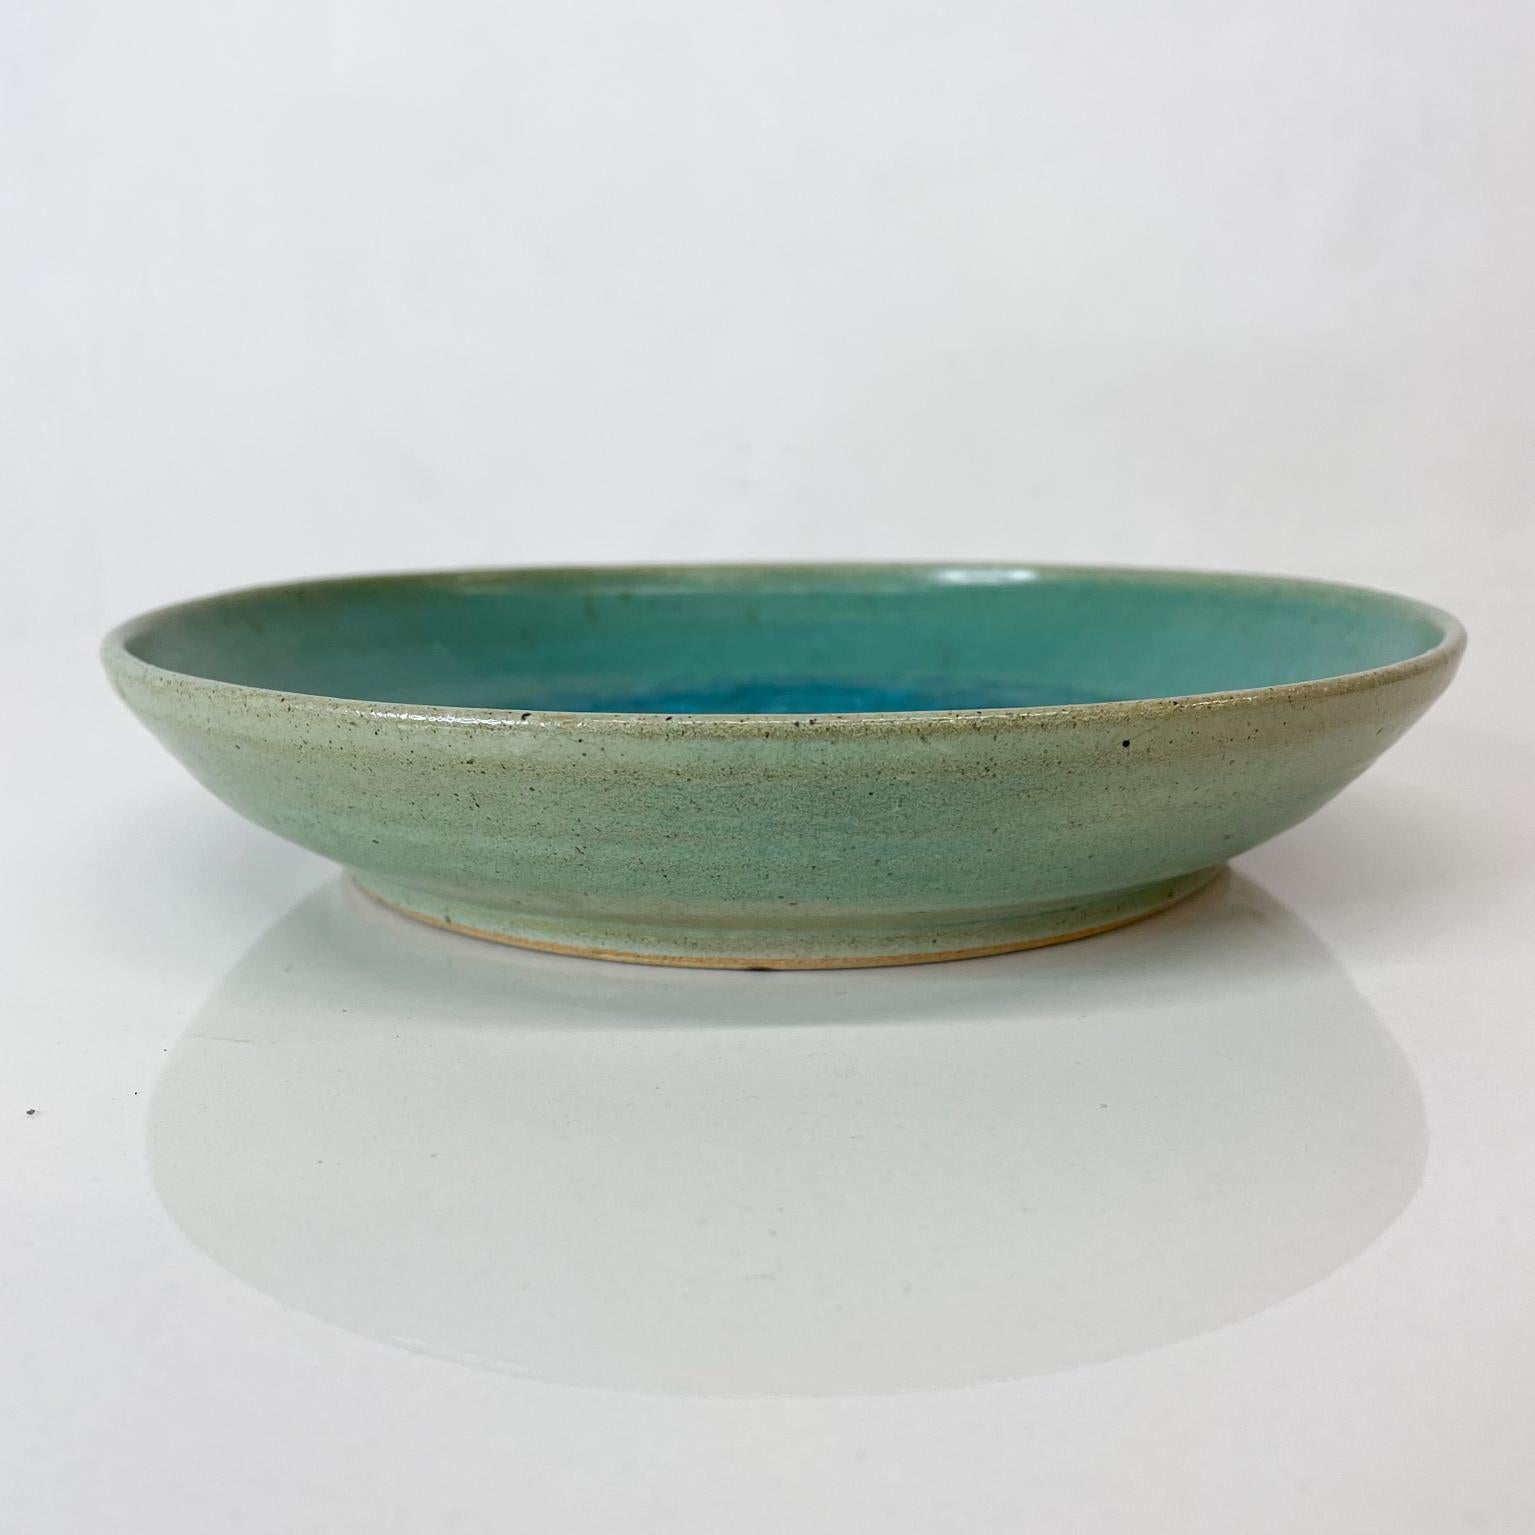 Presenting:
By renowned author and ceramicist, Jade Snow Wong, decorative dish ceramic pottery art in Turquoise San Francisco, CA
circa 1955
Ceramic pottery with enamel glass inserts. Hand signed and numbered on reverse.
Dimensions: 8 Diameter x